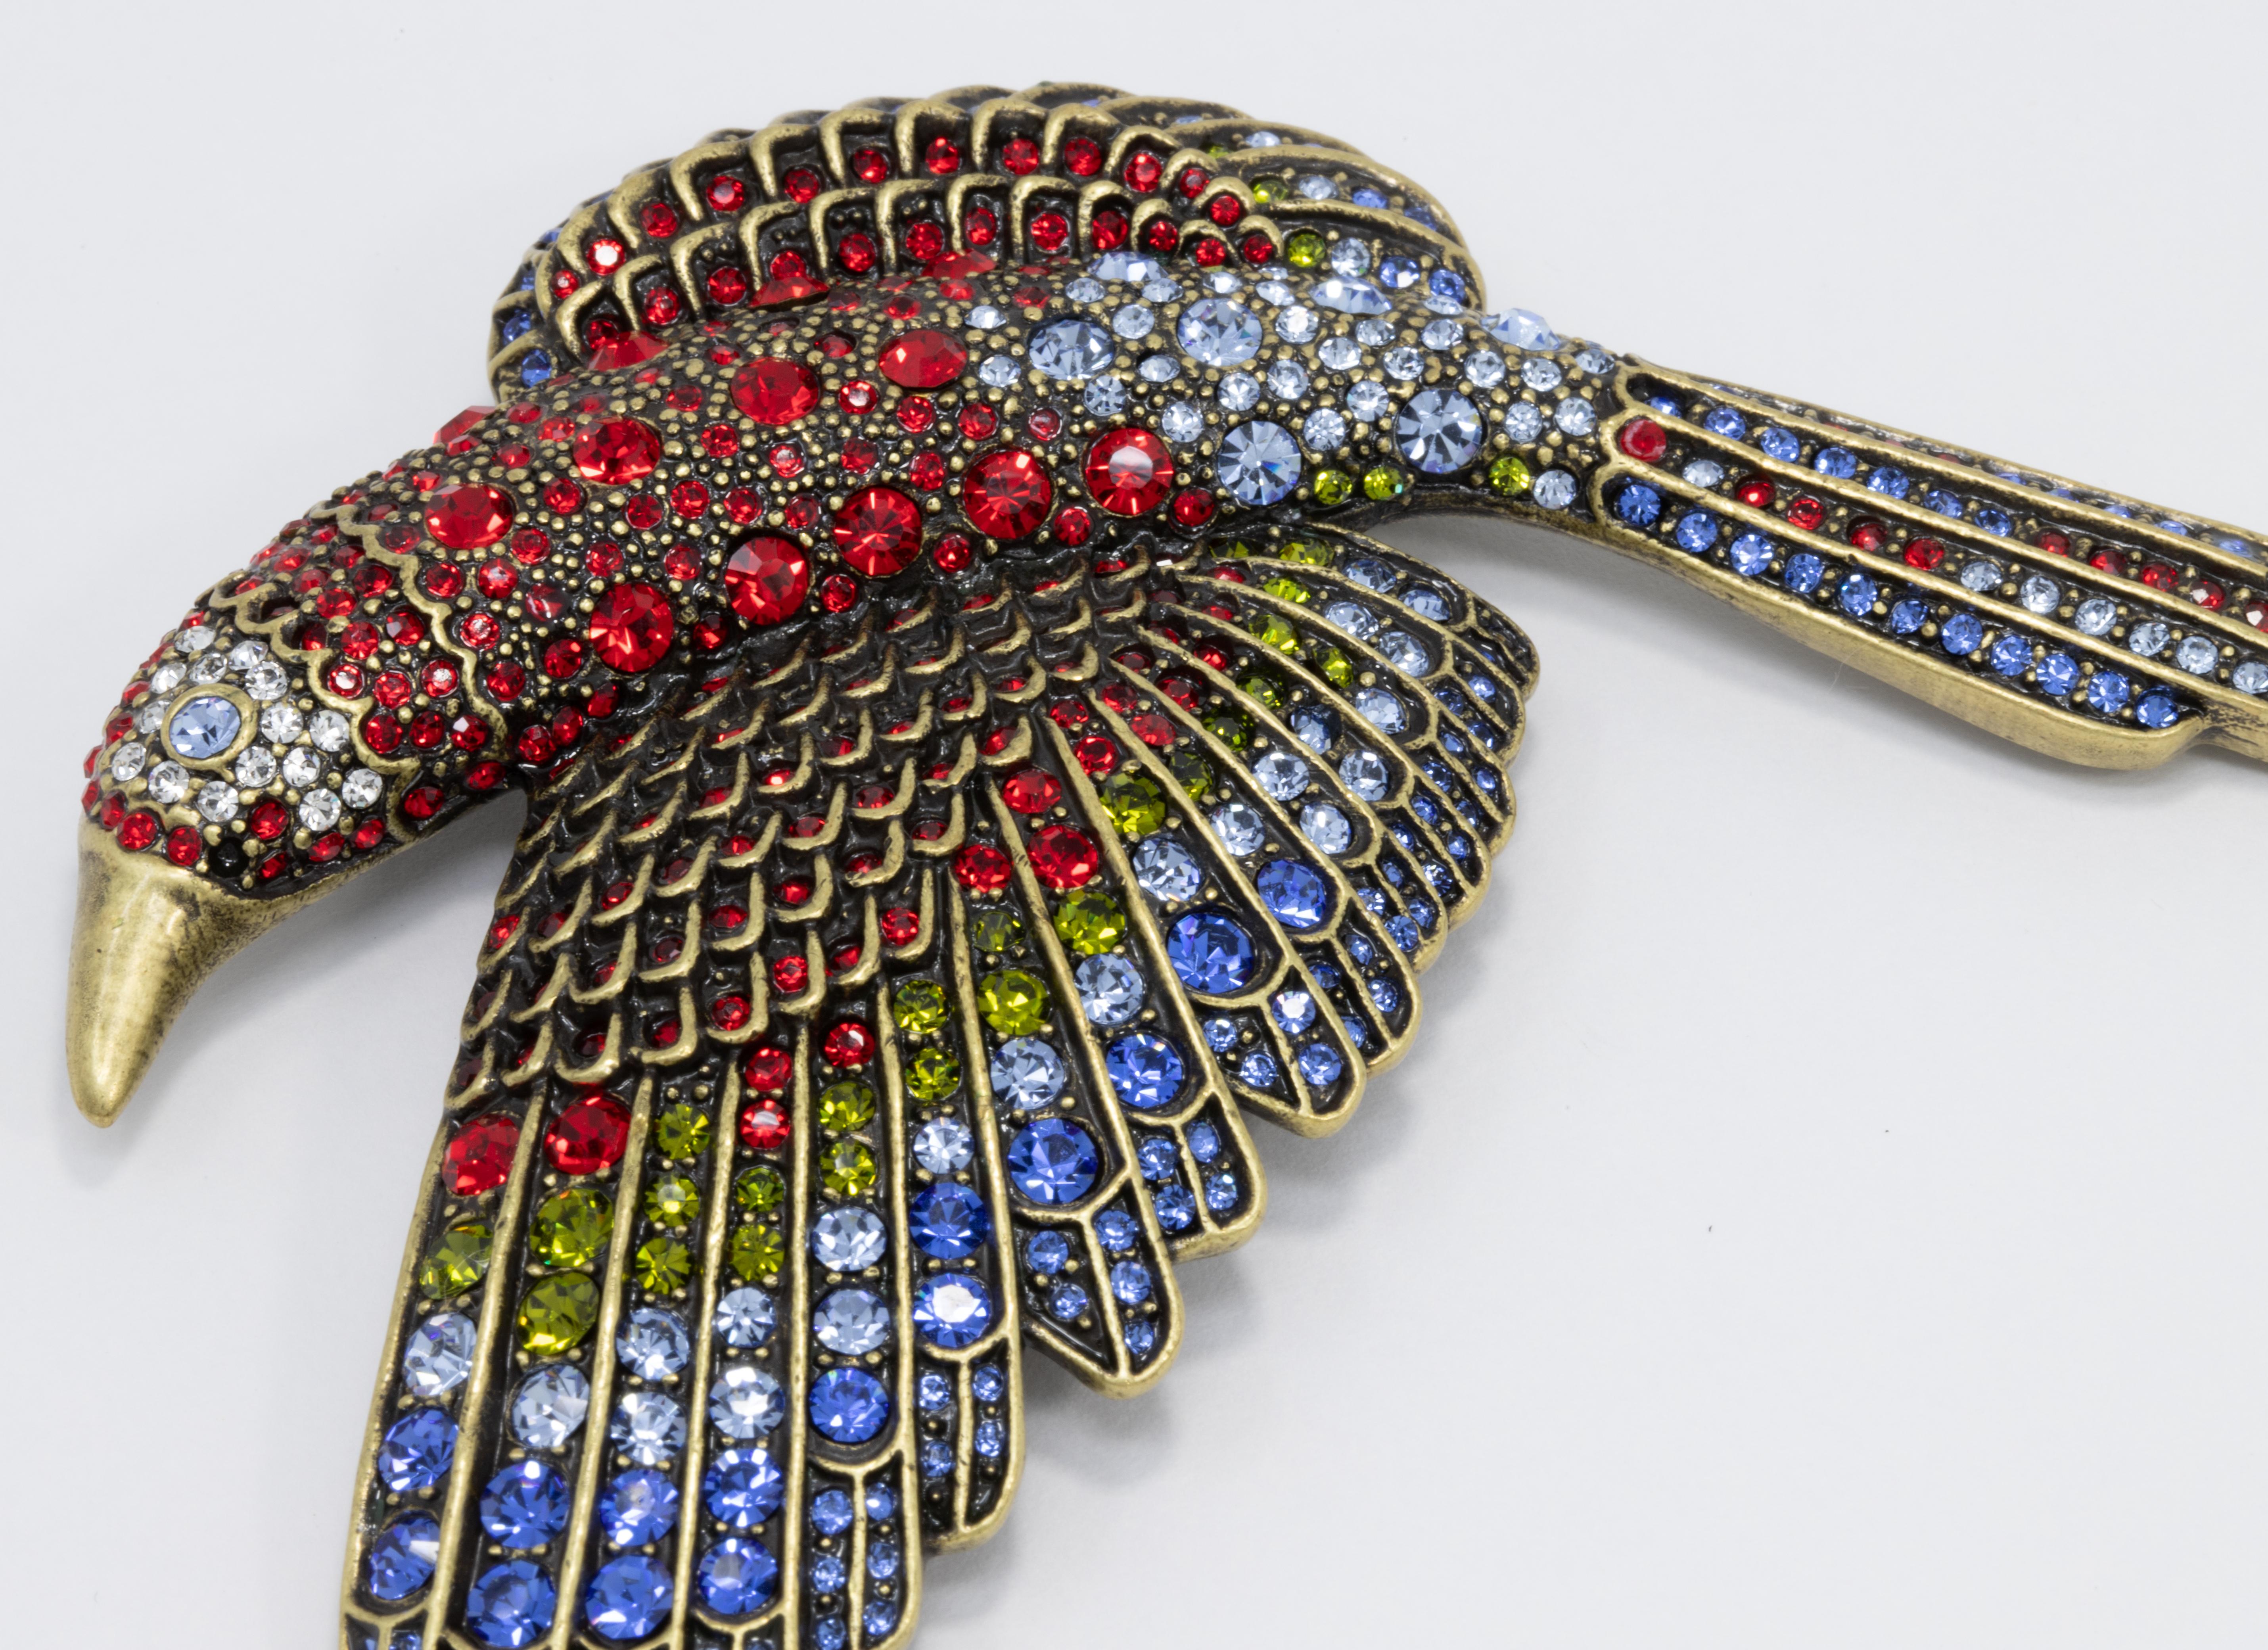 An exotic tropical parrot pin by Heidi Daus. This glamorous brooch is decorated with ruby, sapphire, aquamarine, and olivine crystals. Bring a stylish touch of the tropics to any outfit!

Marks / hallmarks / etc: Heidi Daus, CN